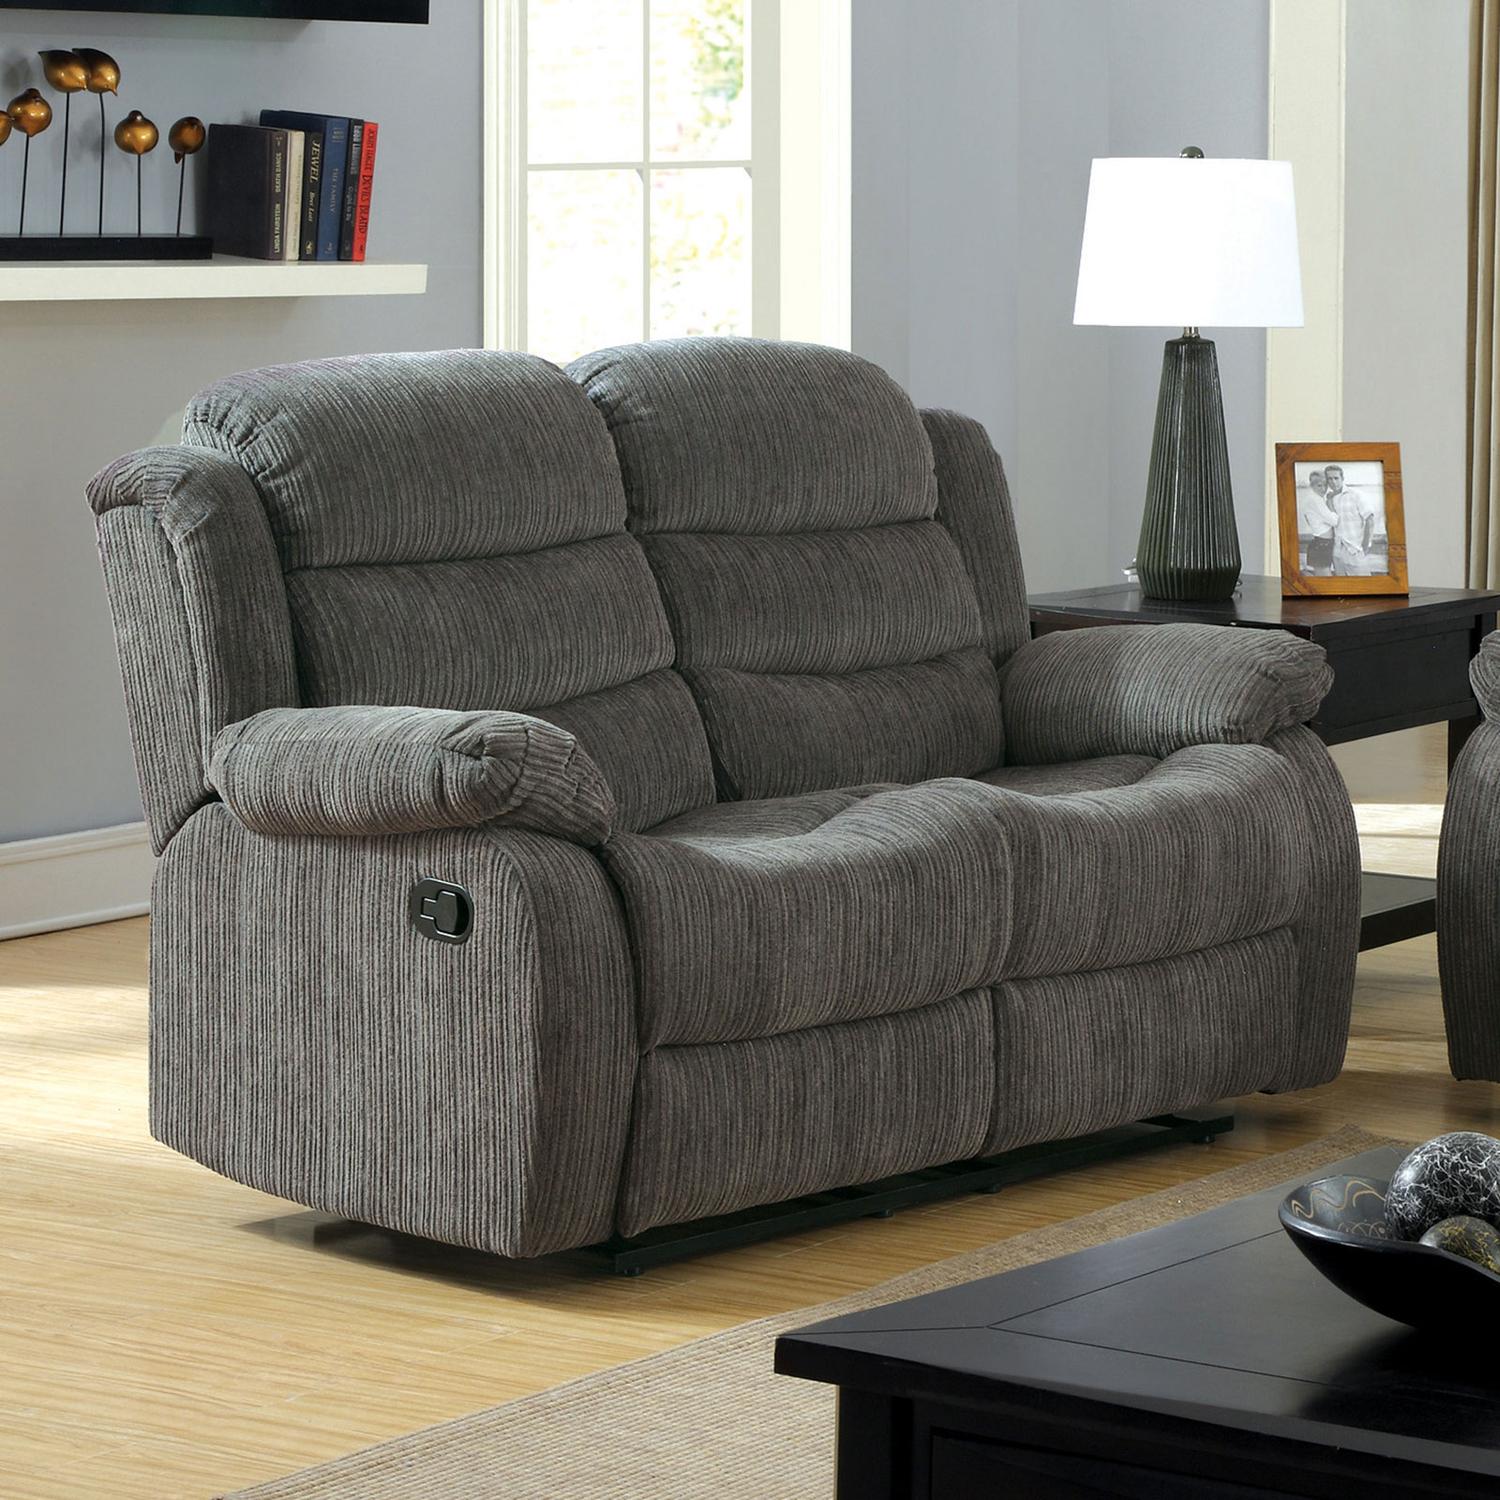 Transitional Recliner Loveseat MILLVILLE CM6173GY-LV CM6173GY-LV in Gray Chenille